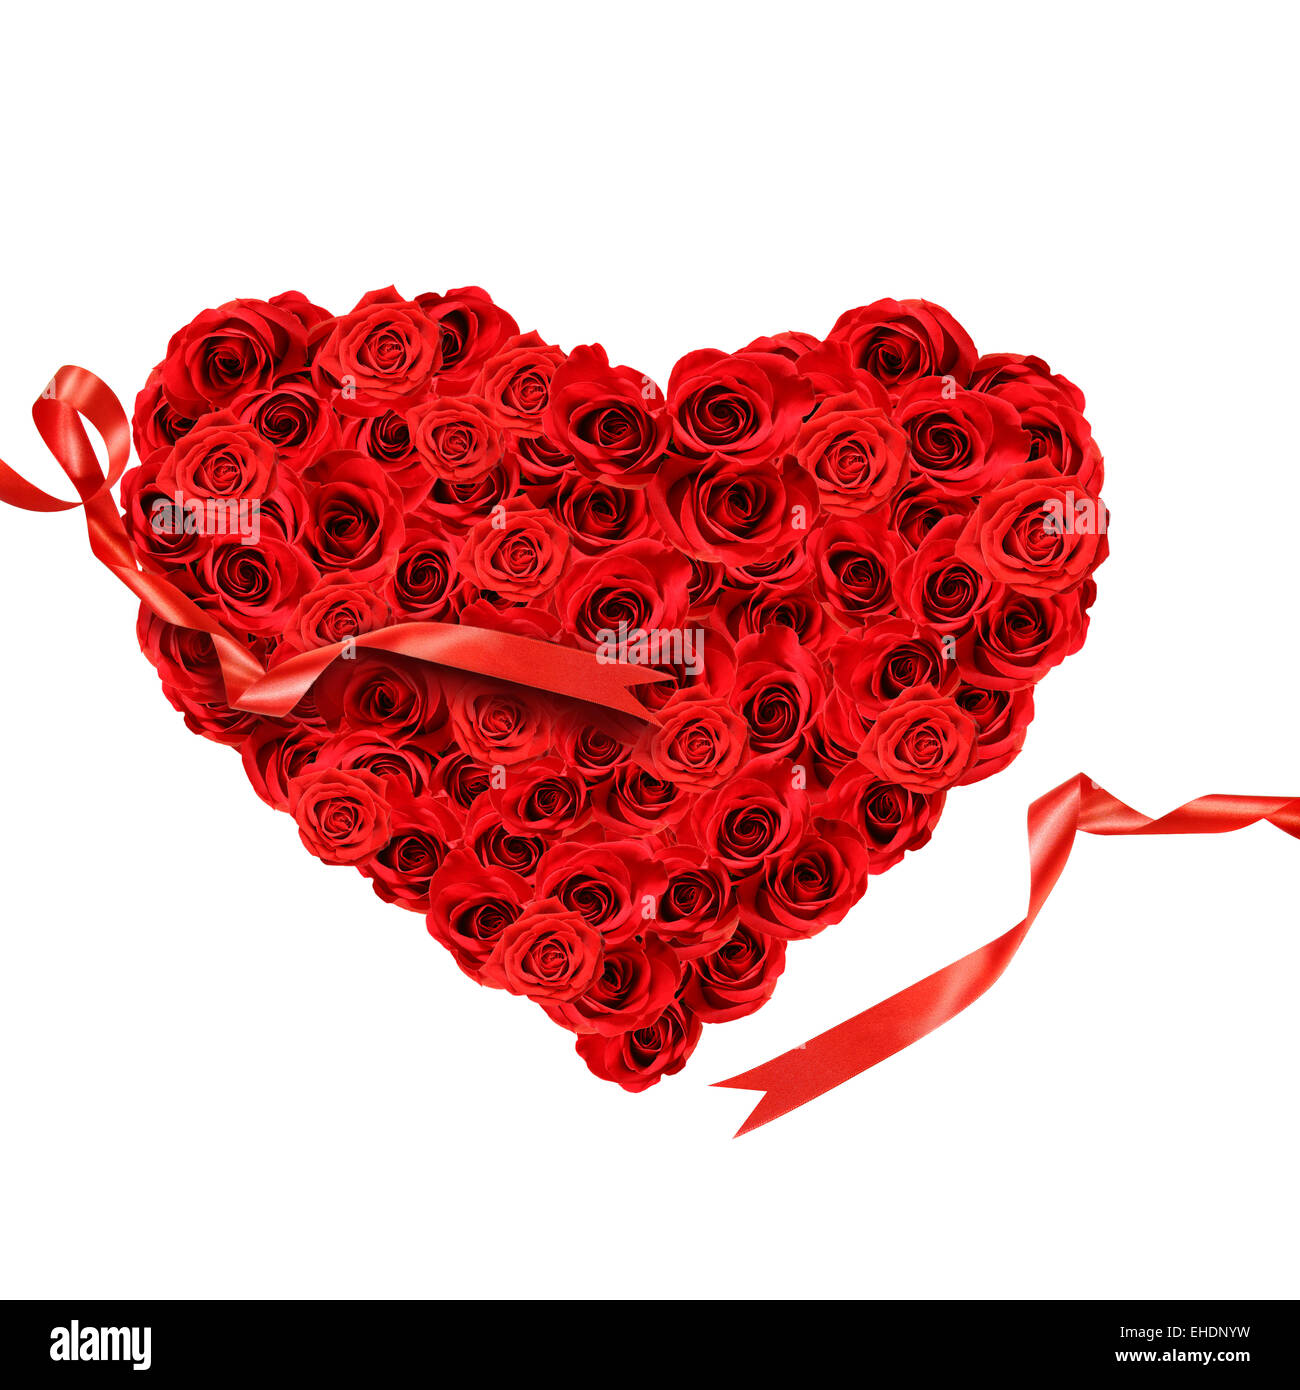 Red roses in the shape of a heart Stock Photo